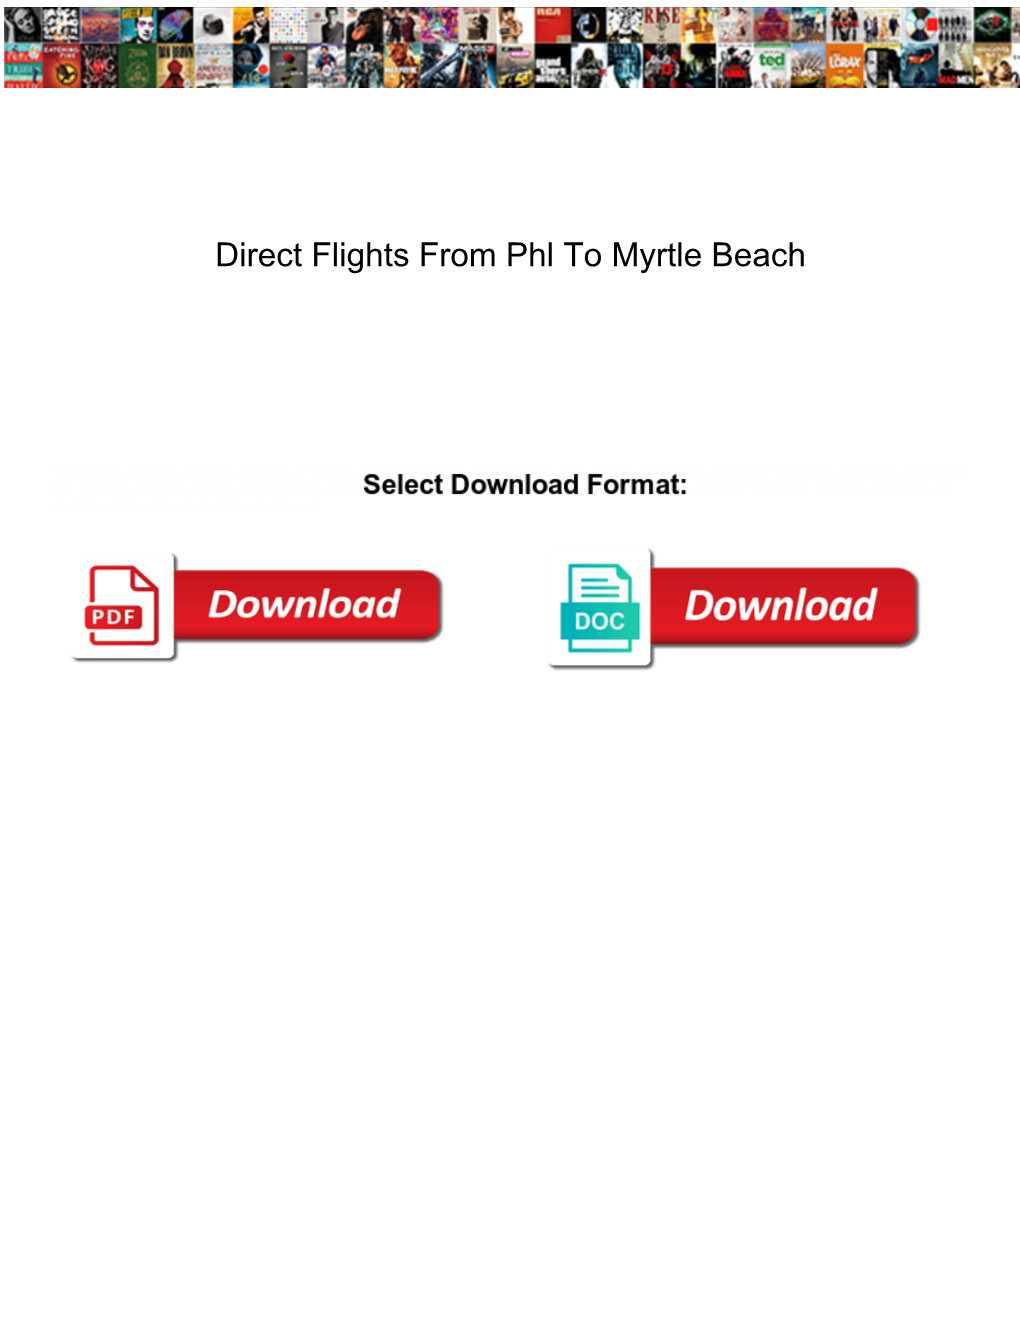 Direct Flights from Phl to Myrtle Beach